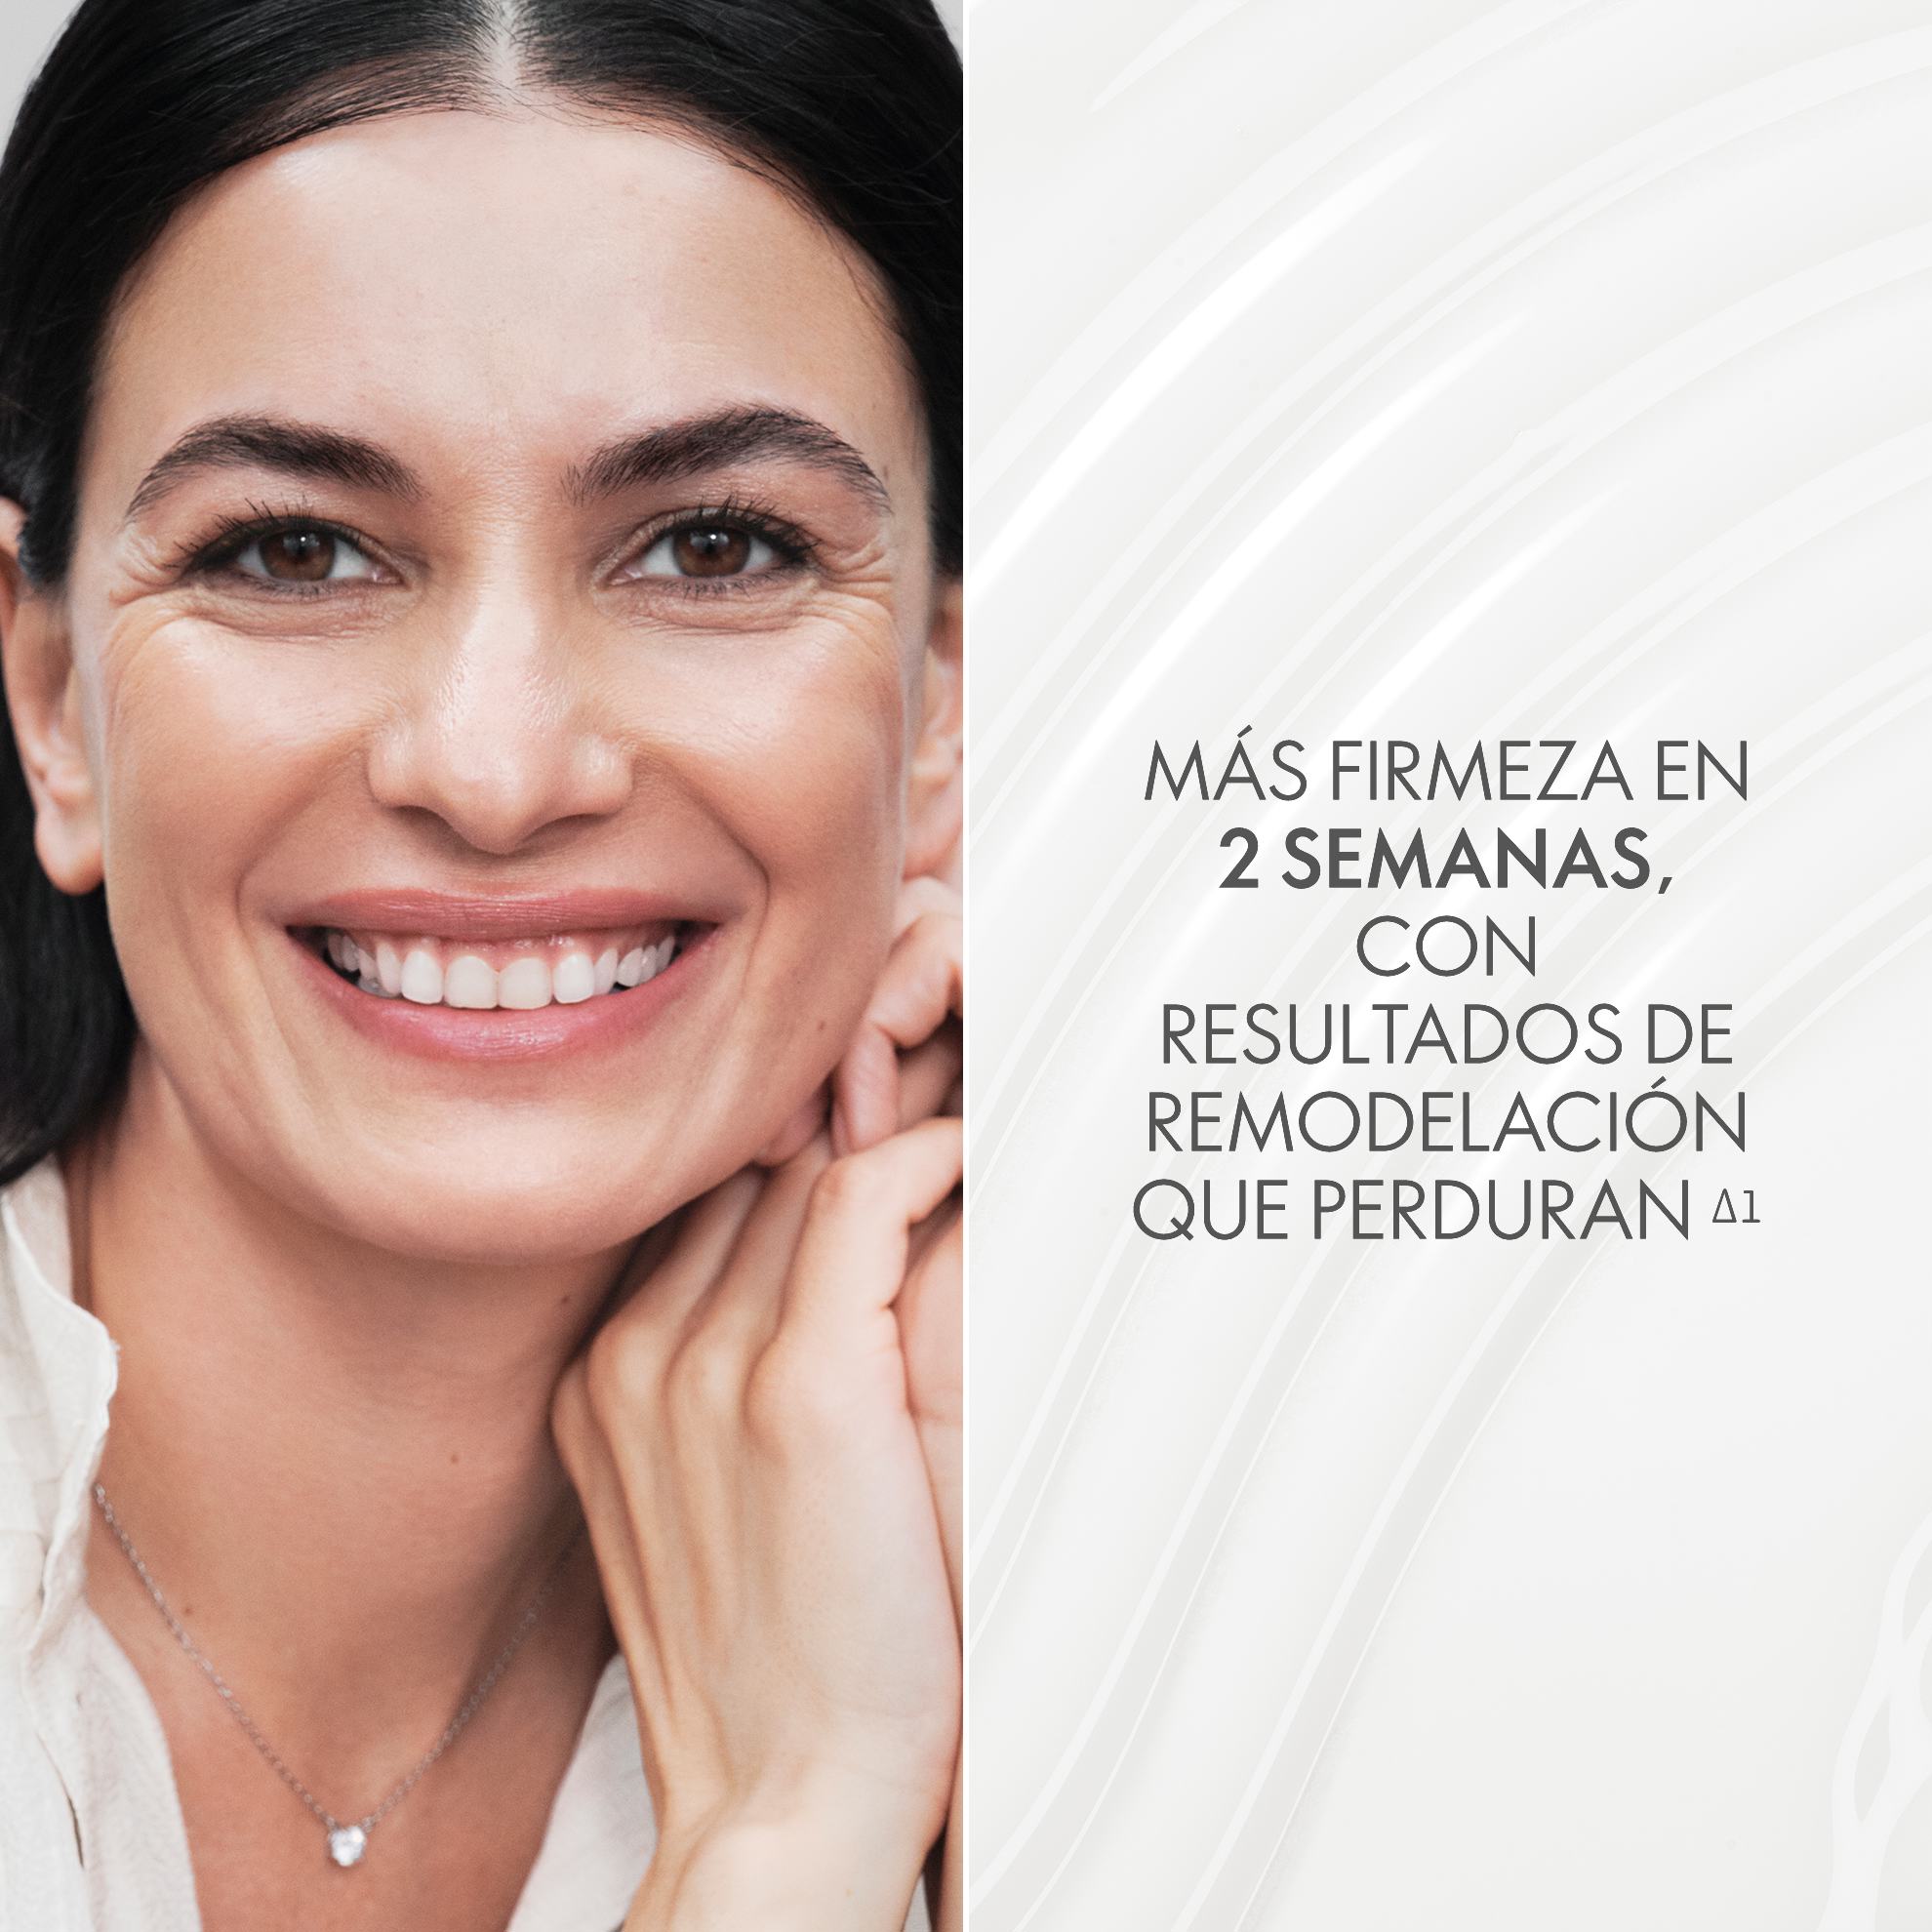 https://media-cdn.oriflame.com/productImage?externalMediaId=product-management-media%2fProducts%2f45592%2fCL%2f45592_2.png&id=18246461&version=1